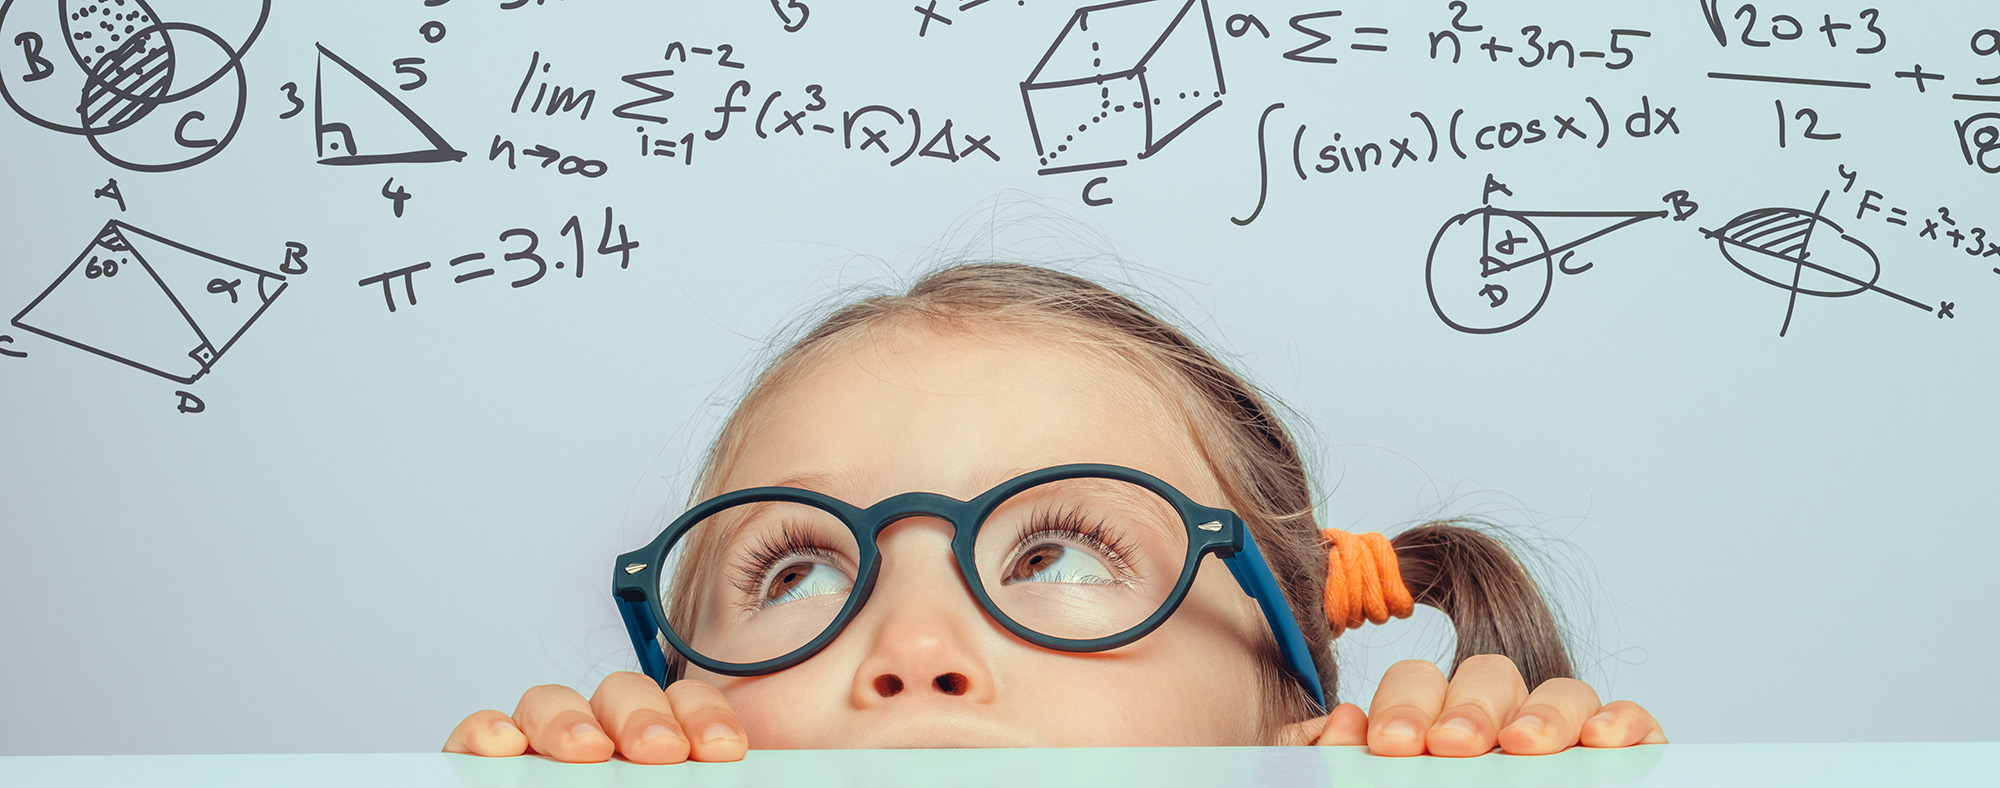 little girl peeking over a table looking up towards math formulas and problems on the wall above her